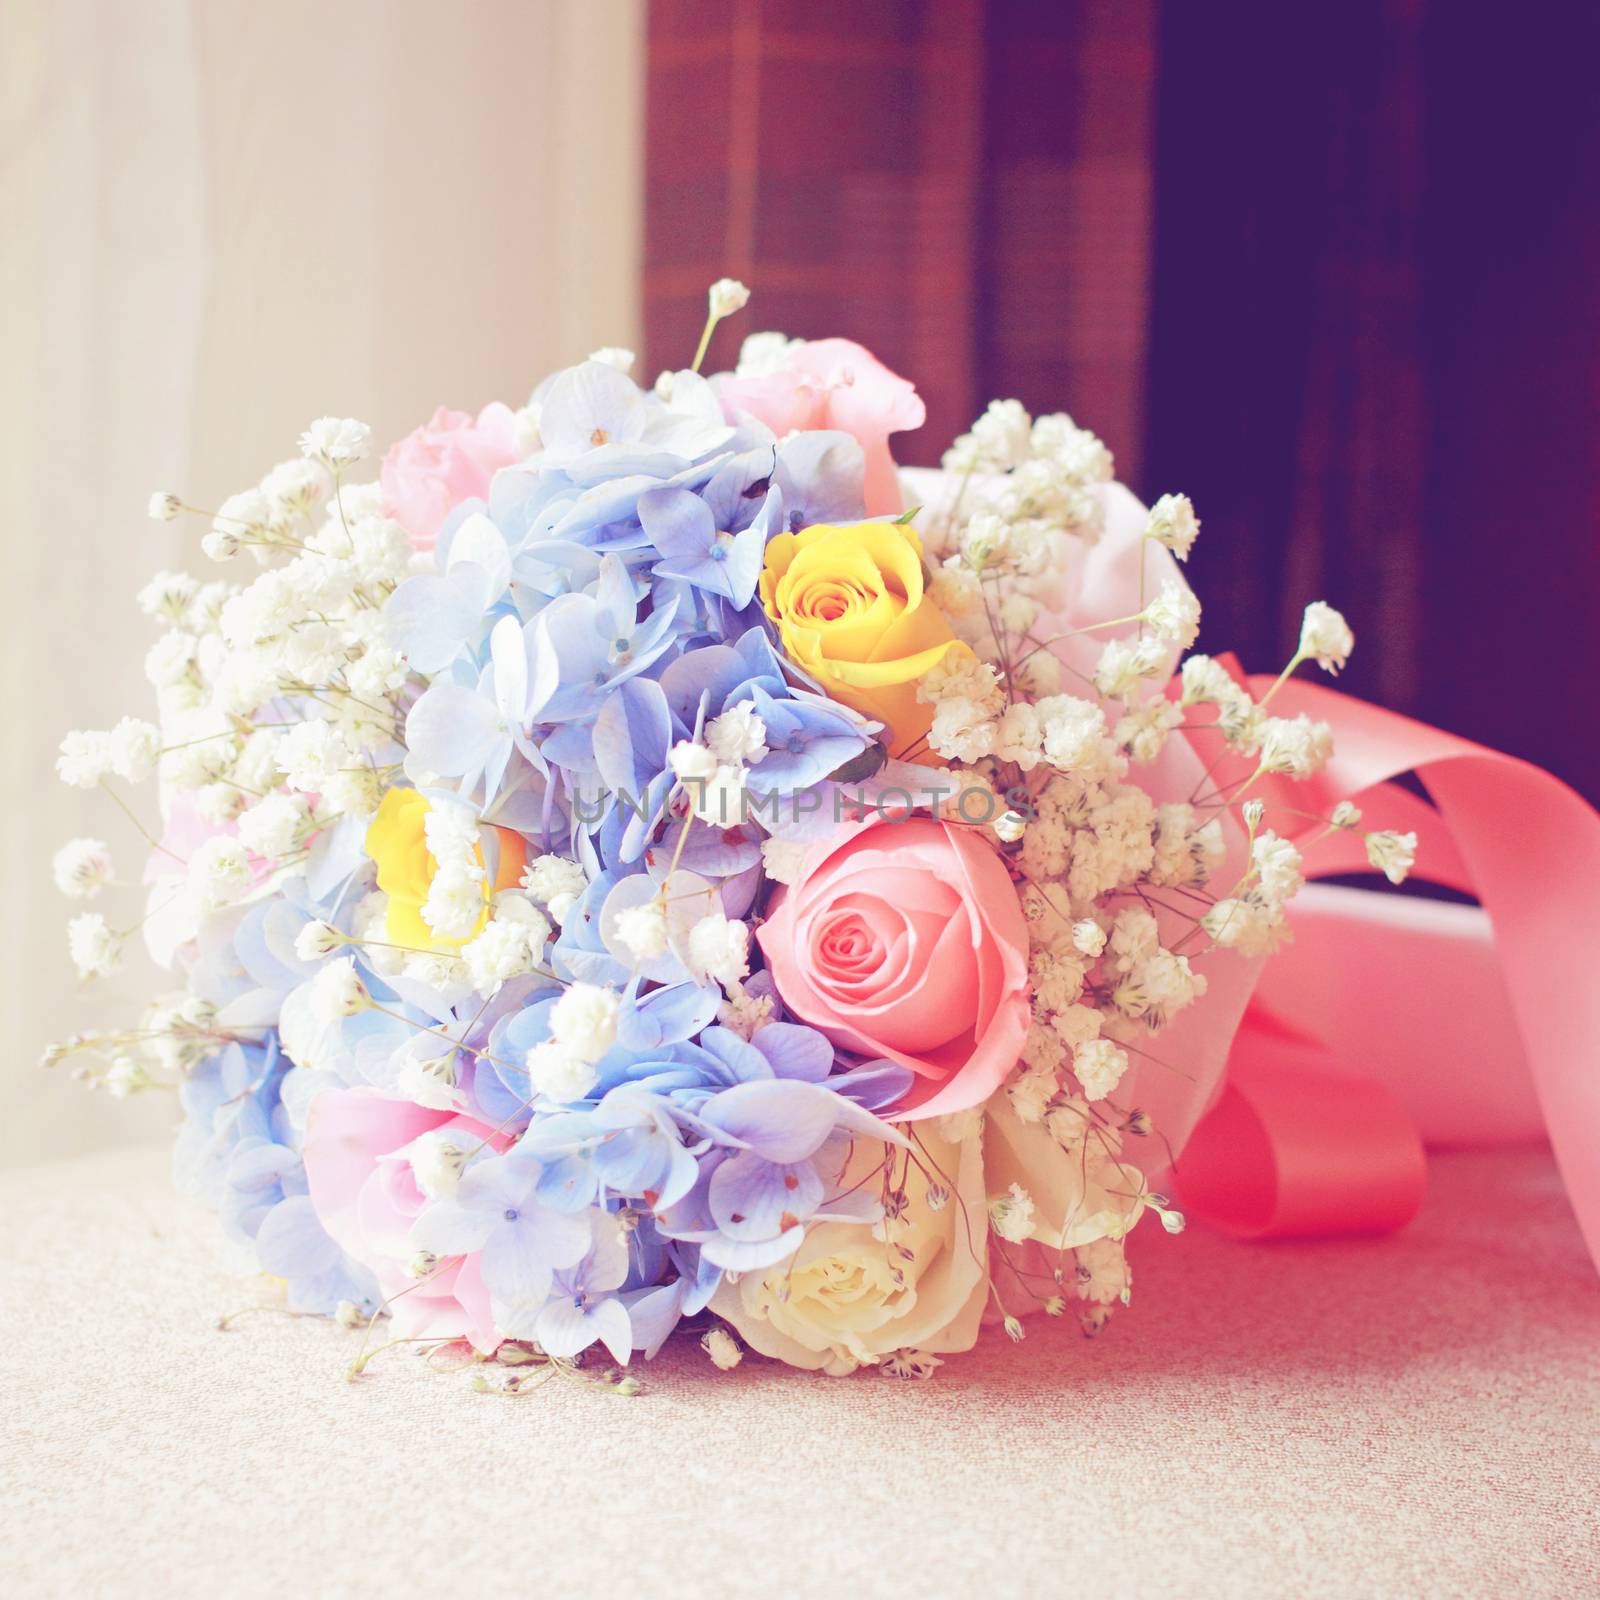 Beautiful bouquet for wedding ceremony with retro filter